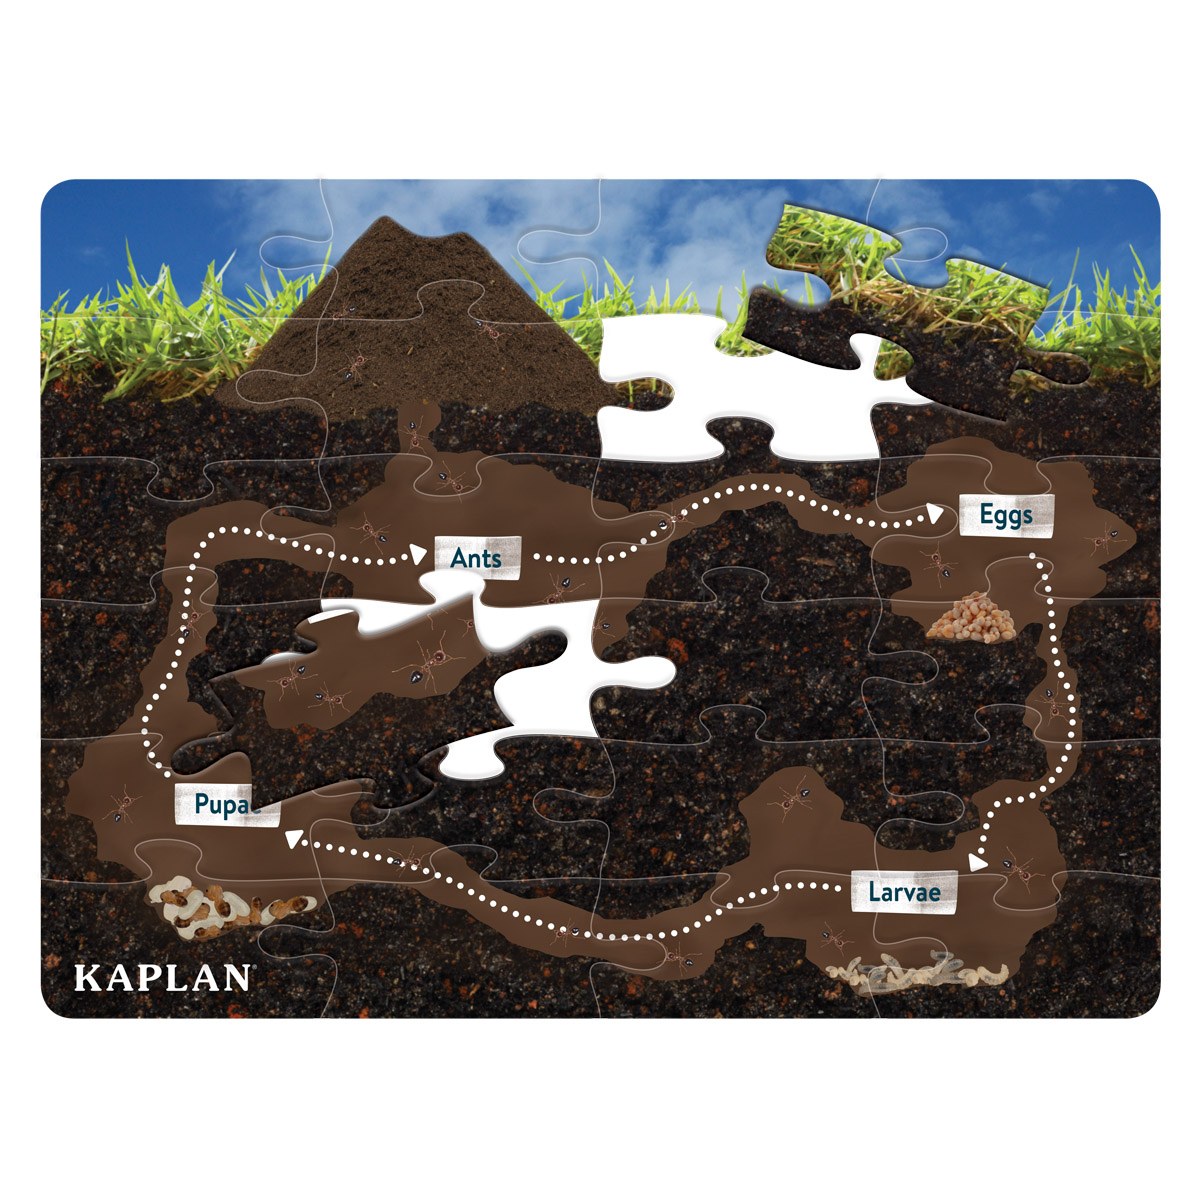 Kaplan Early Learning Company Life Cycle Floor Puzzle from Egg to Ant - 24 Pieces